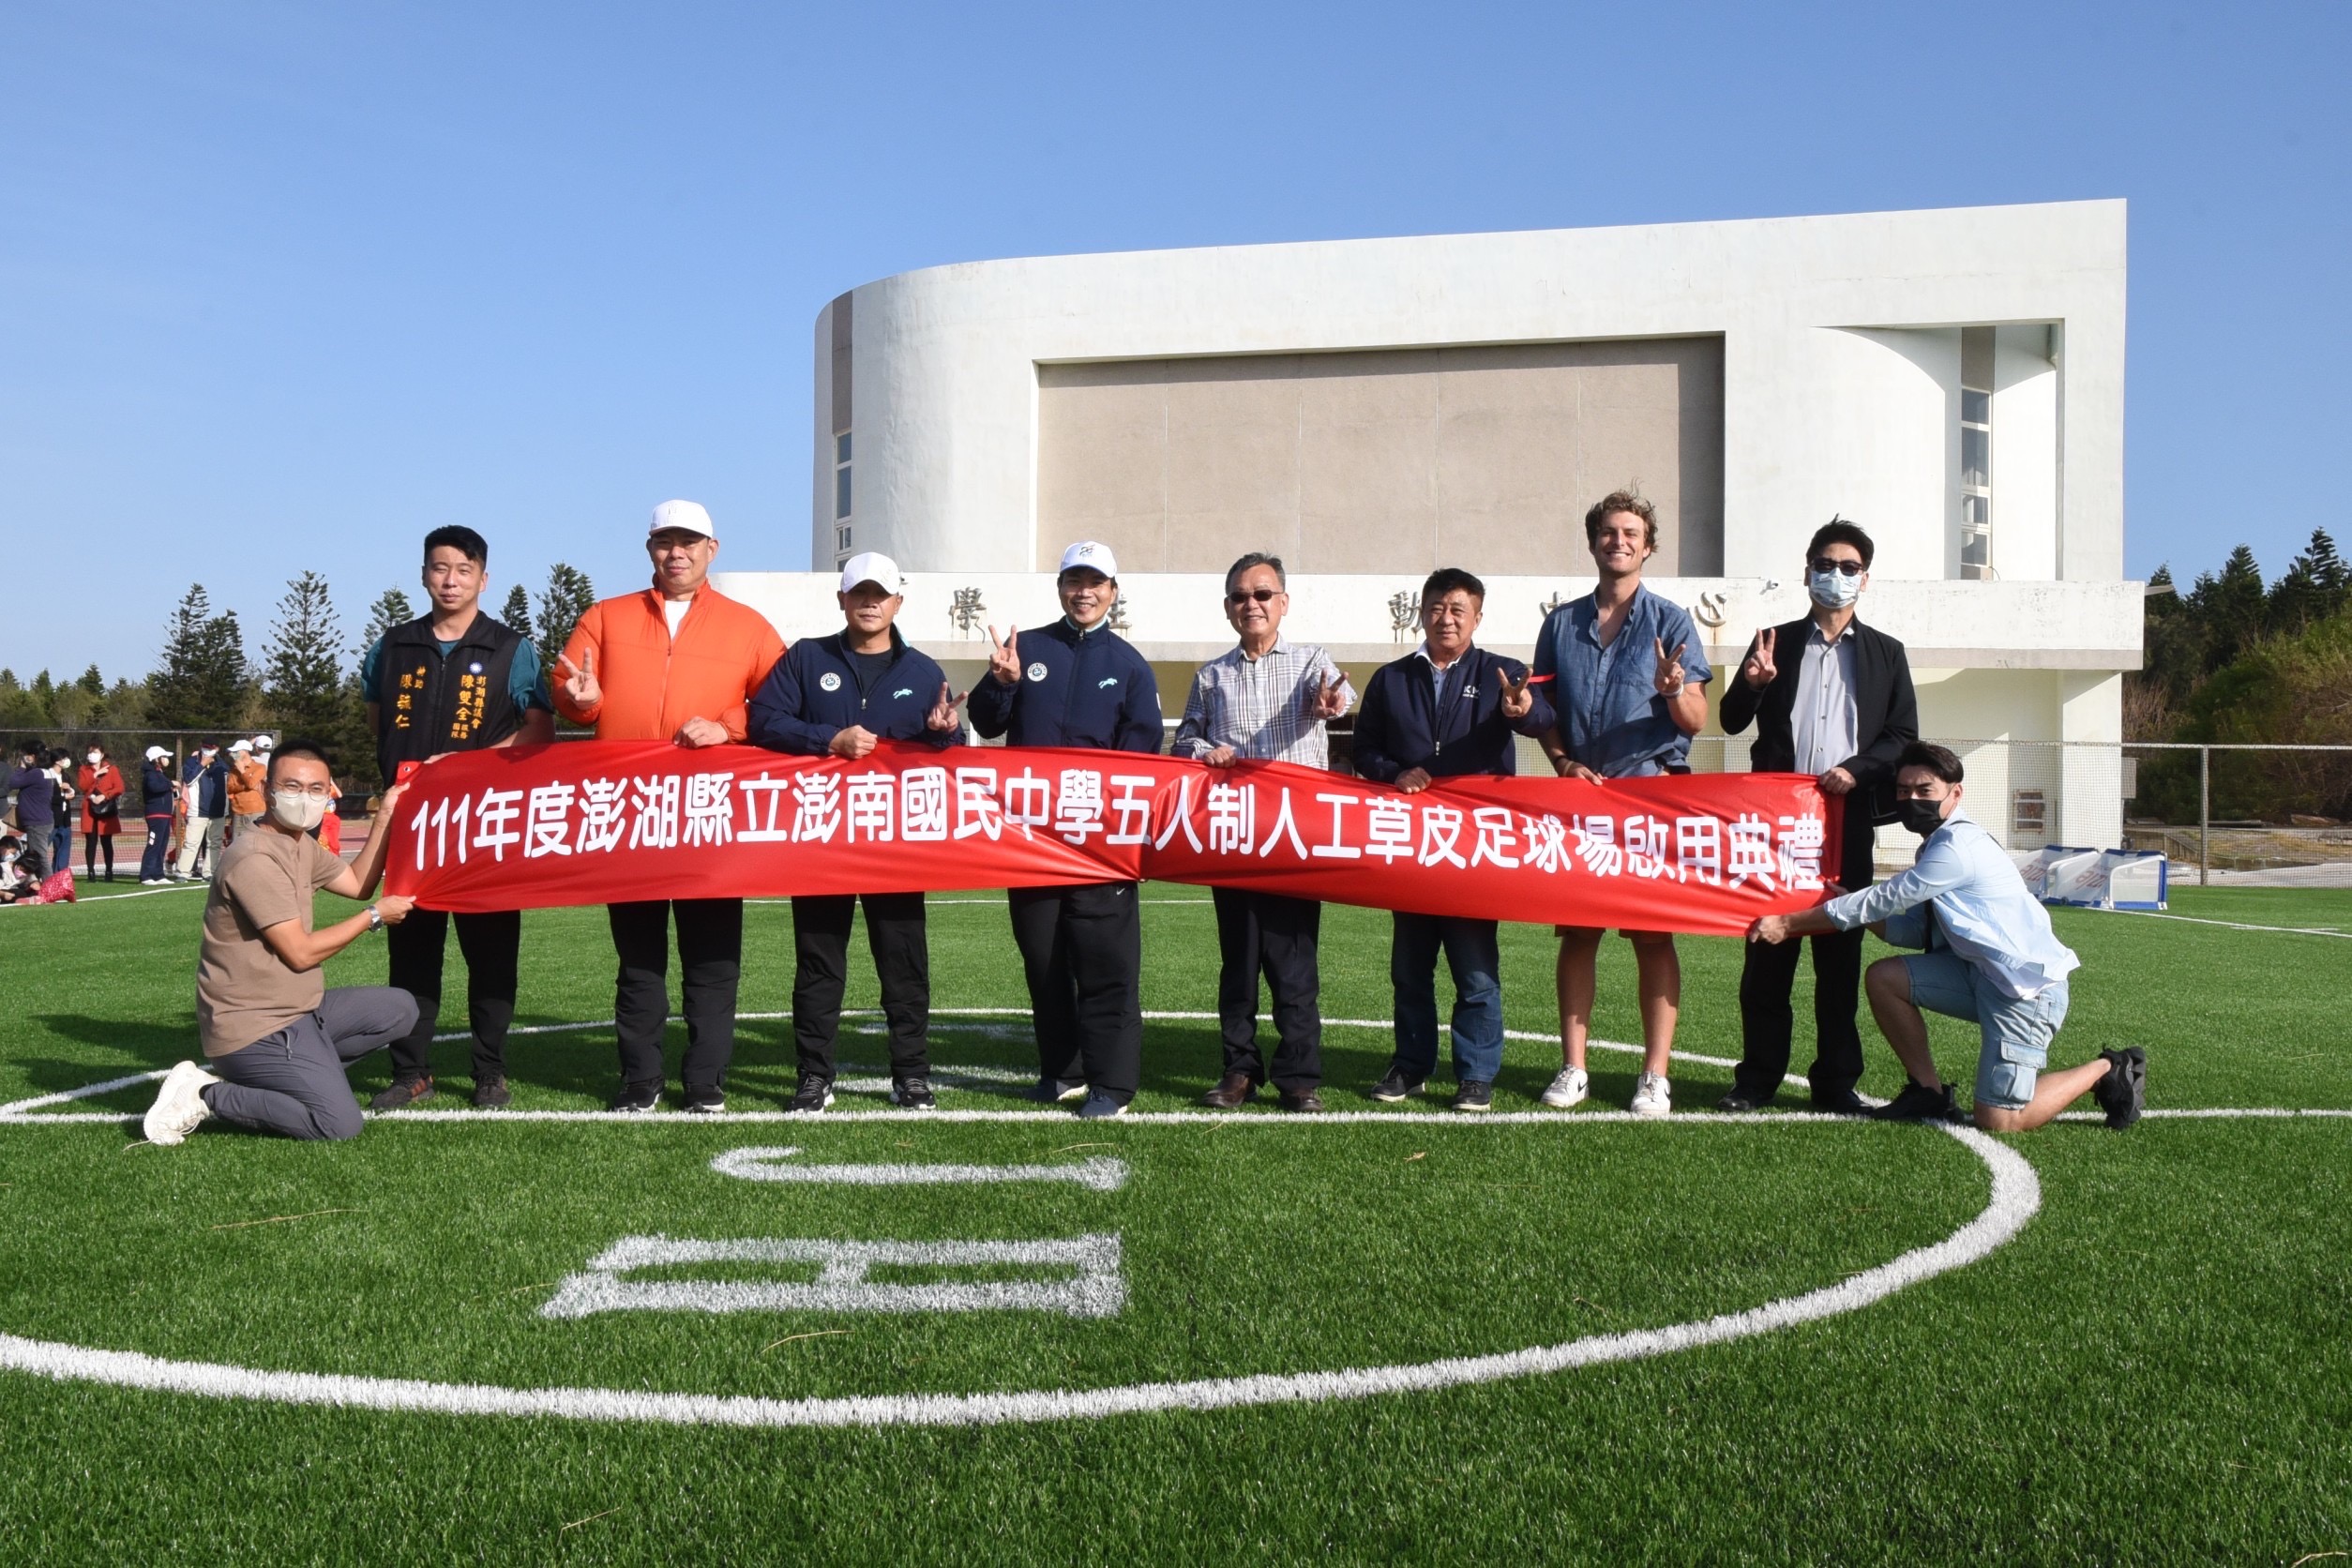 The first artificial turf football field was inaugurated at Pengnan Junior High School